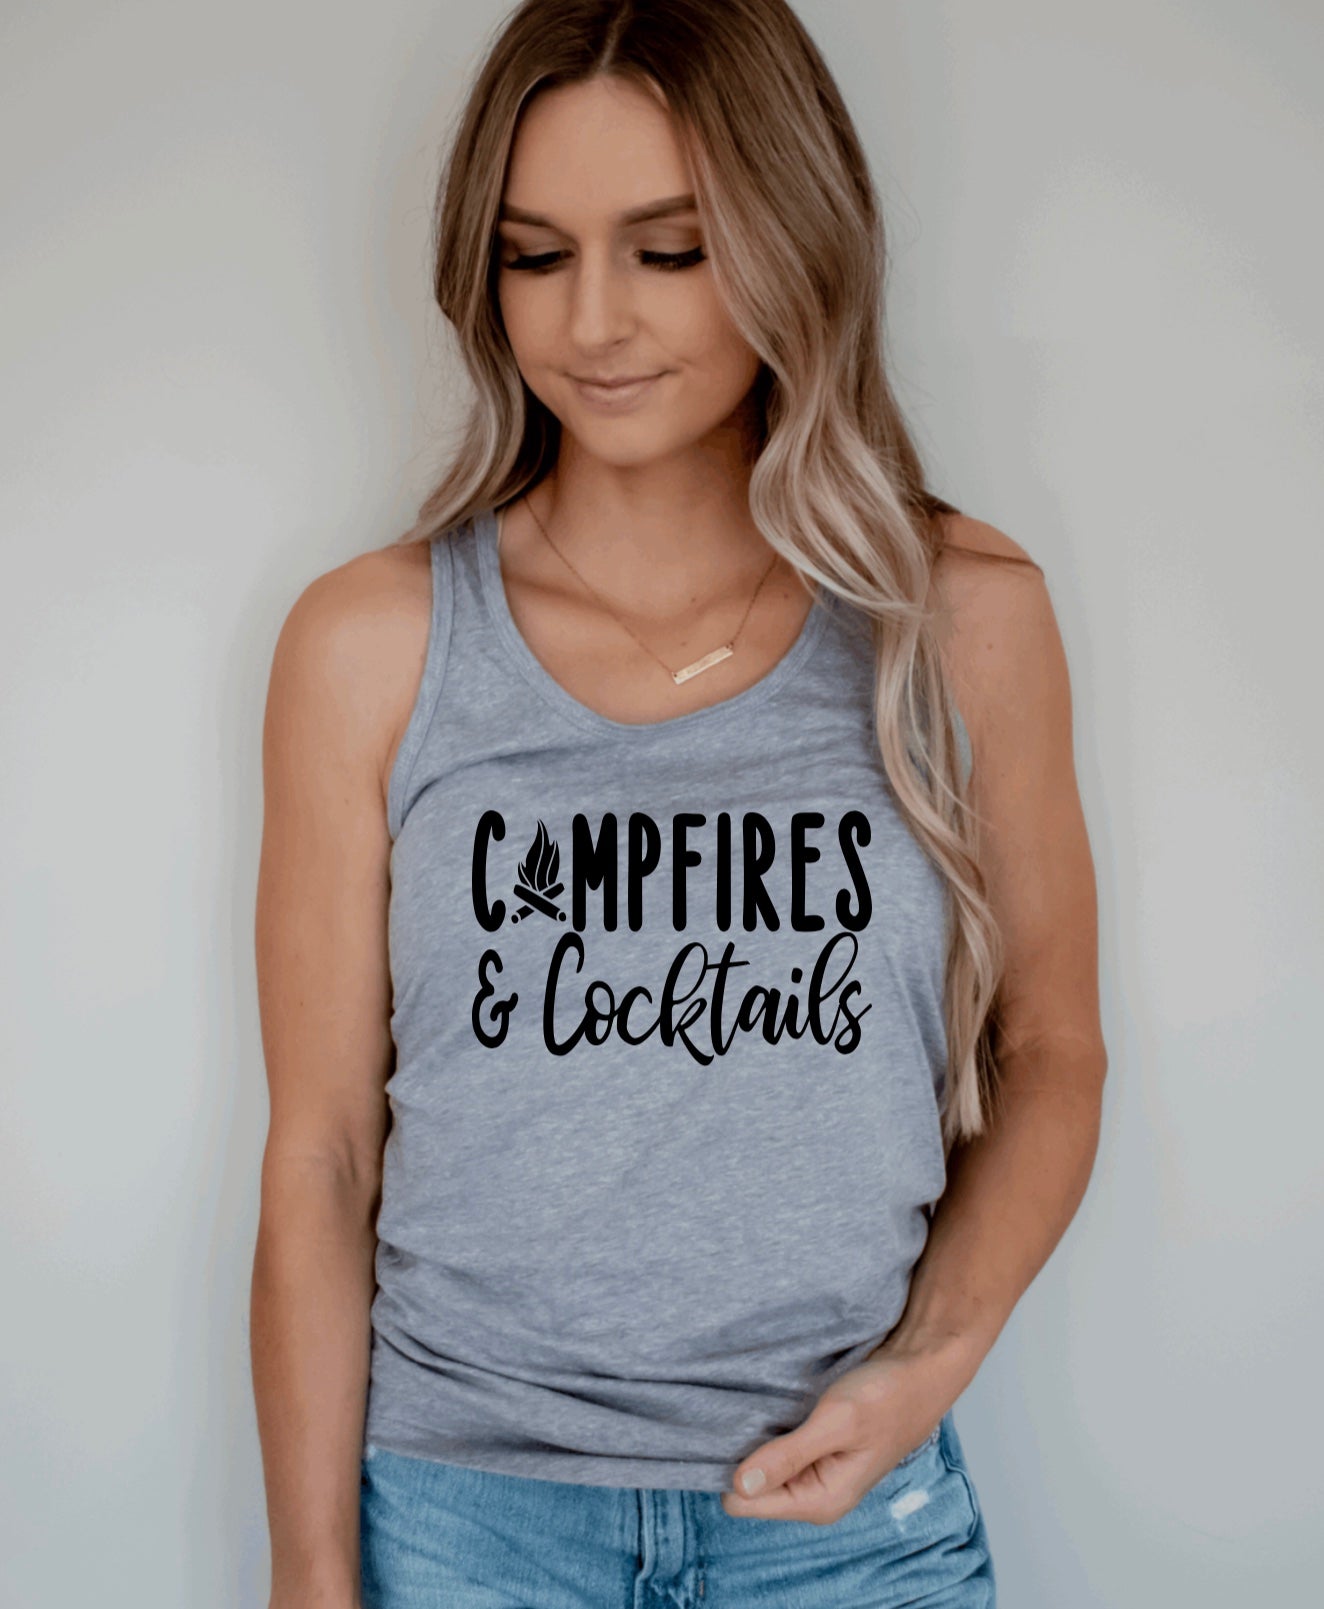 Campfires and cocktails racerback tank top